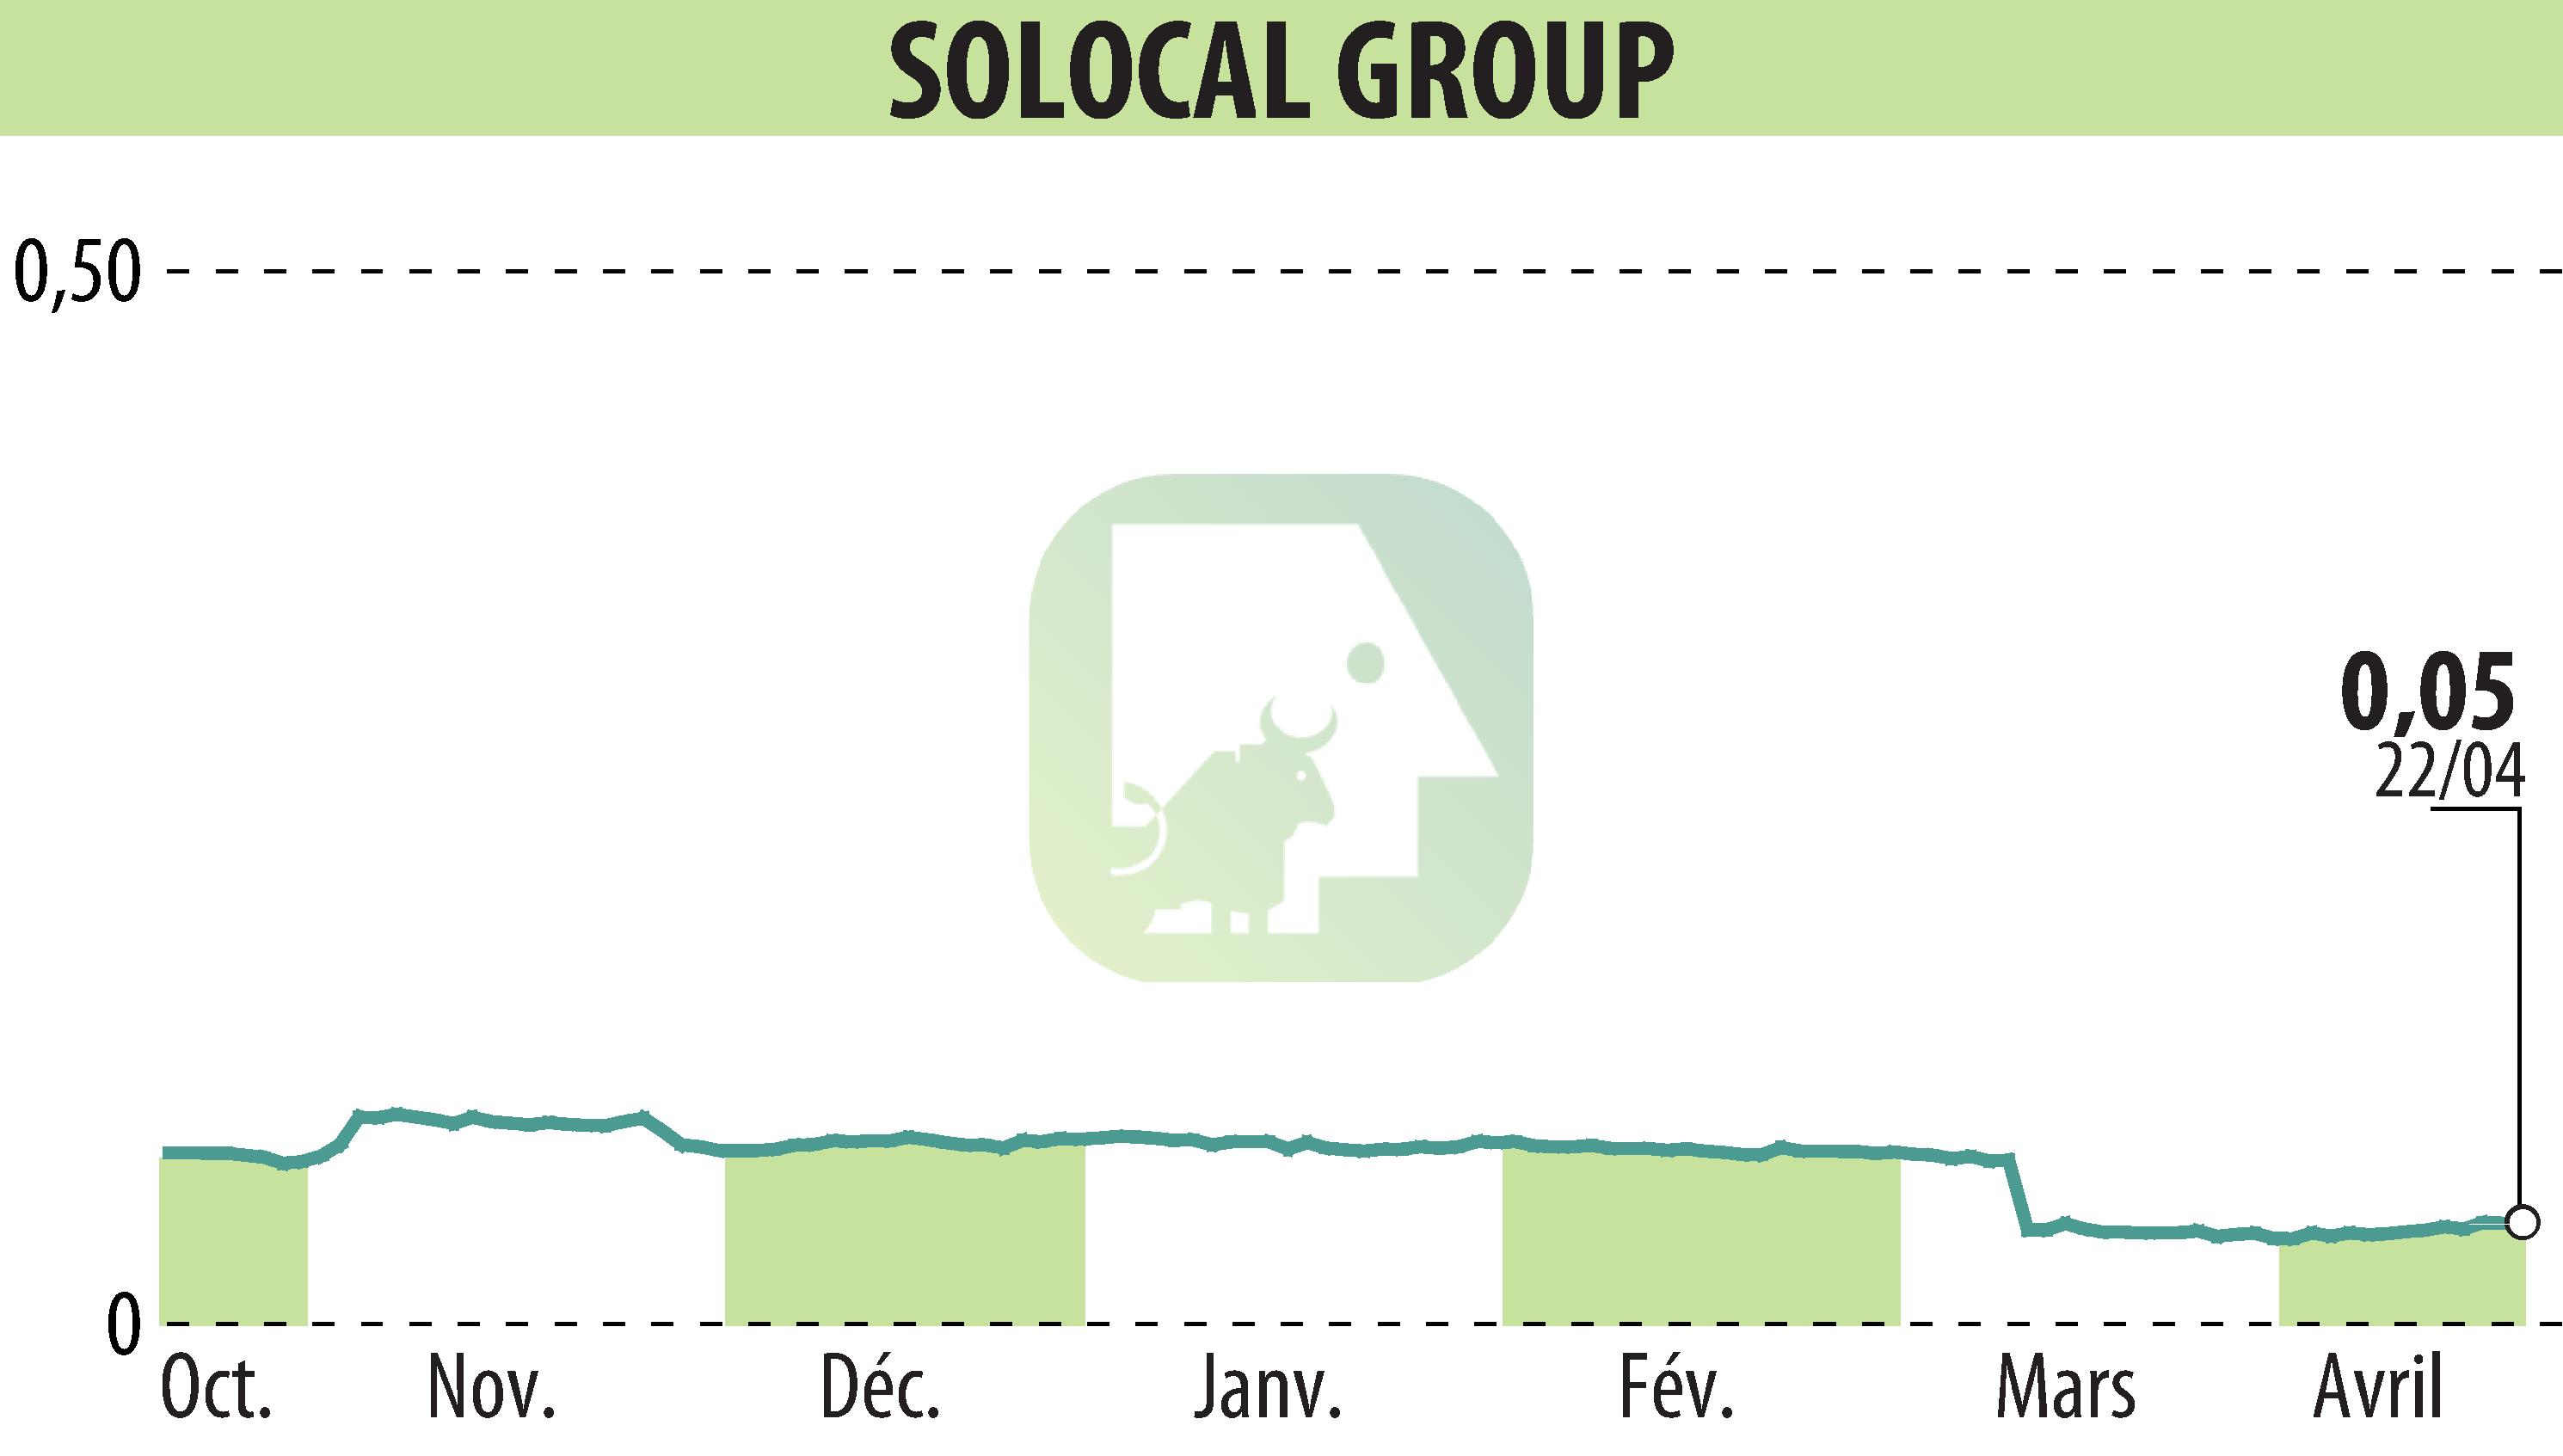 Stock price chart of SOLOCAL (EPA:LOCAL) showing fluctuations.